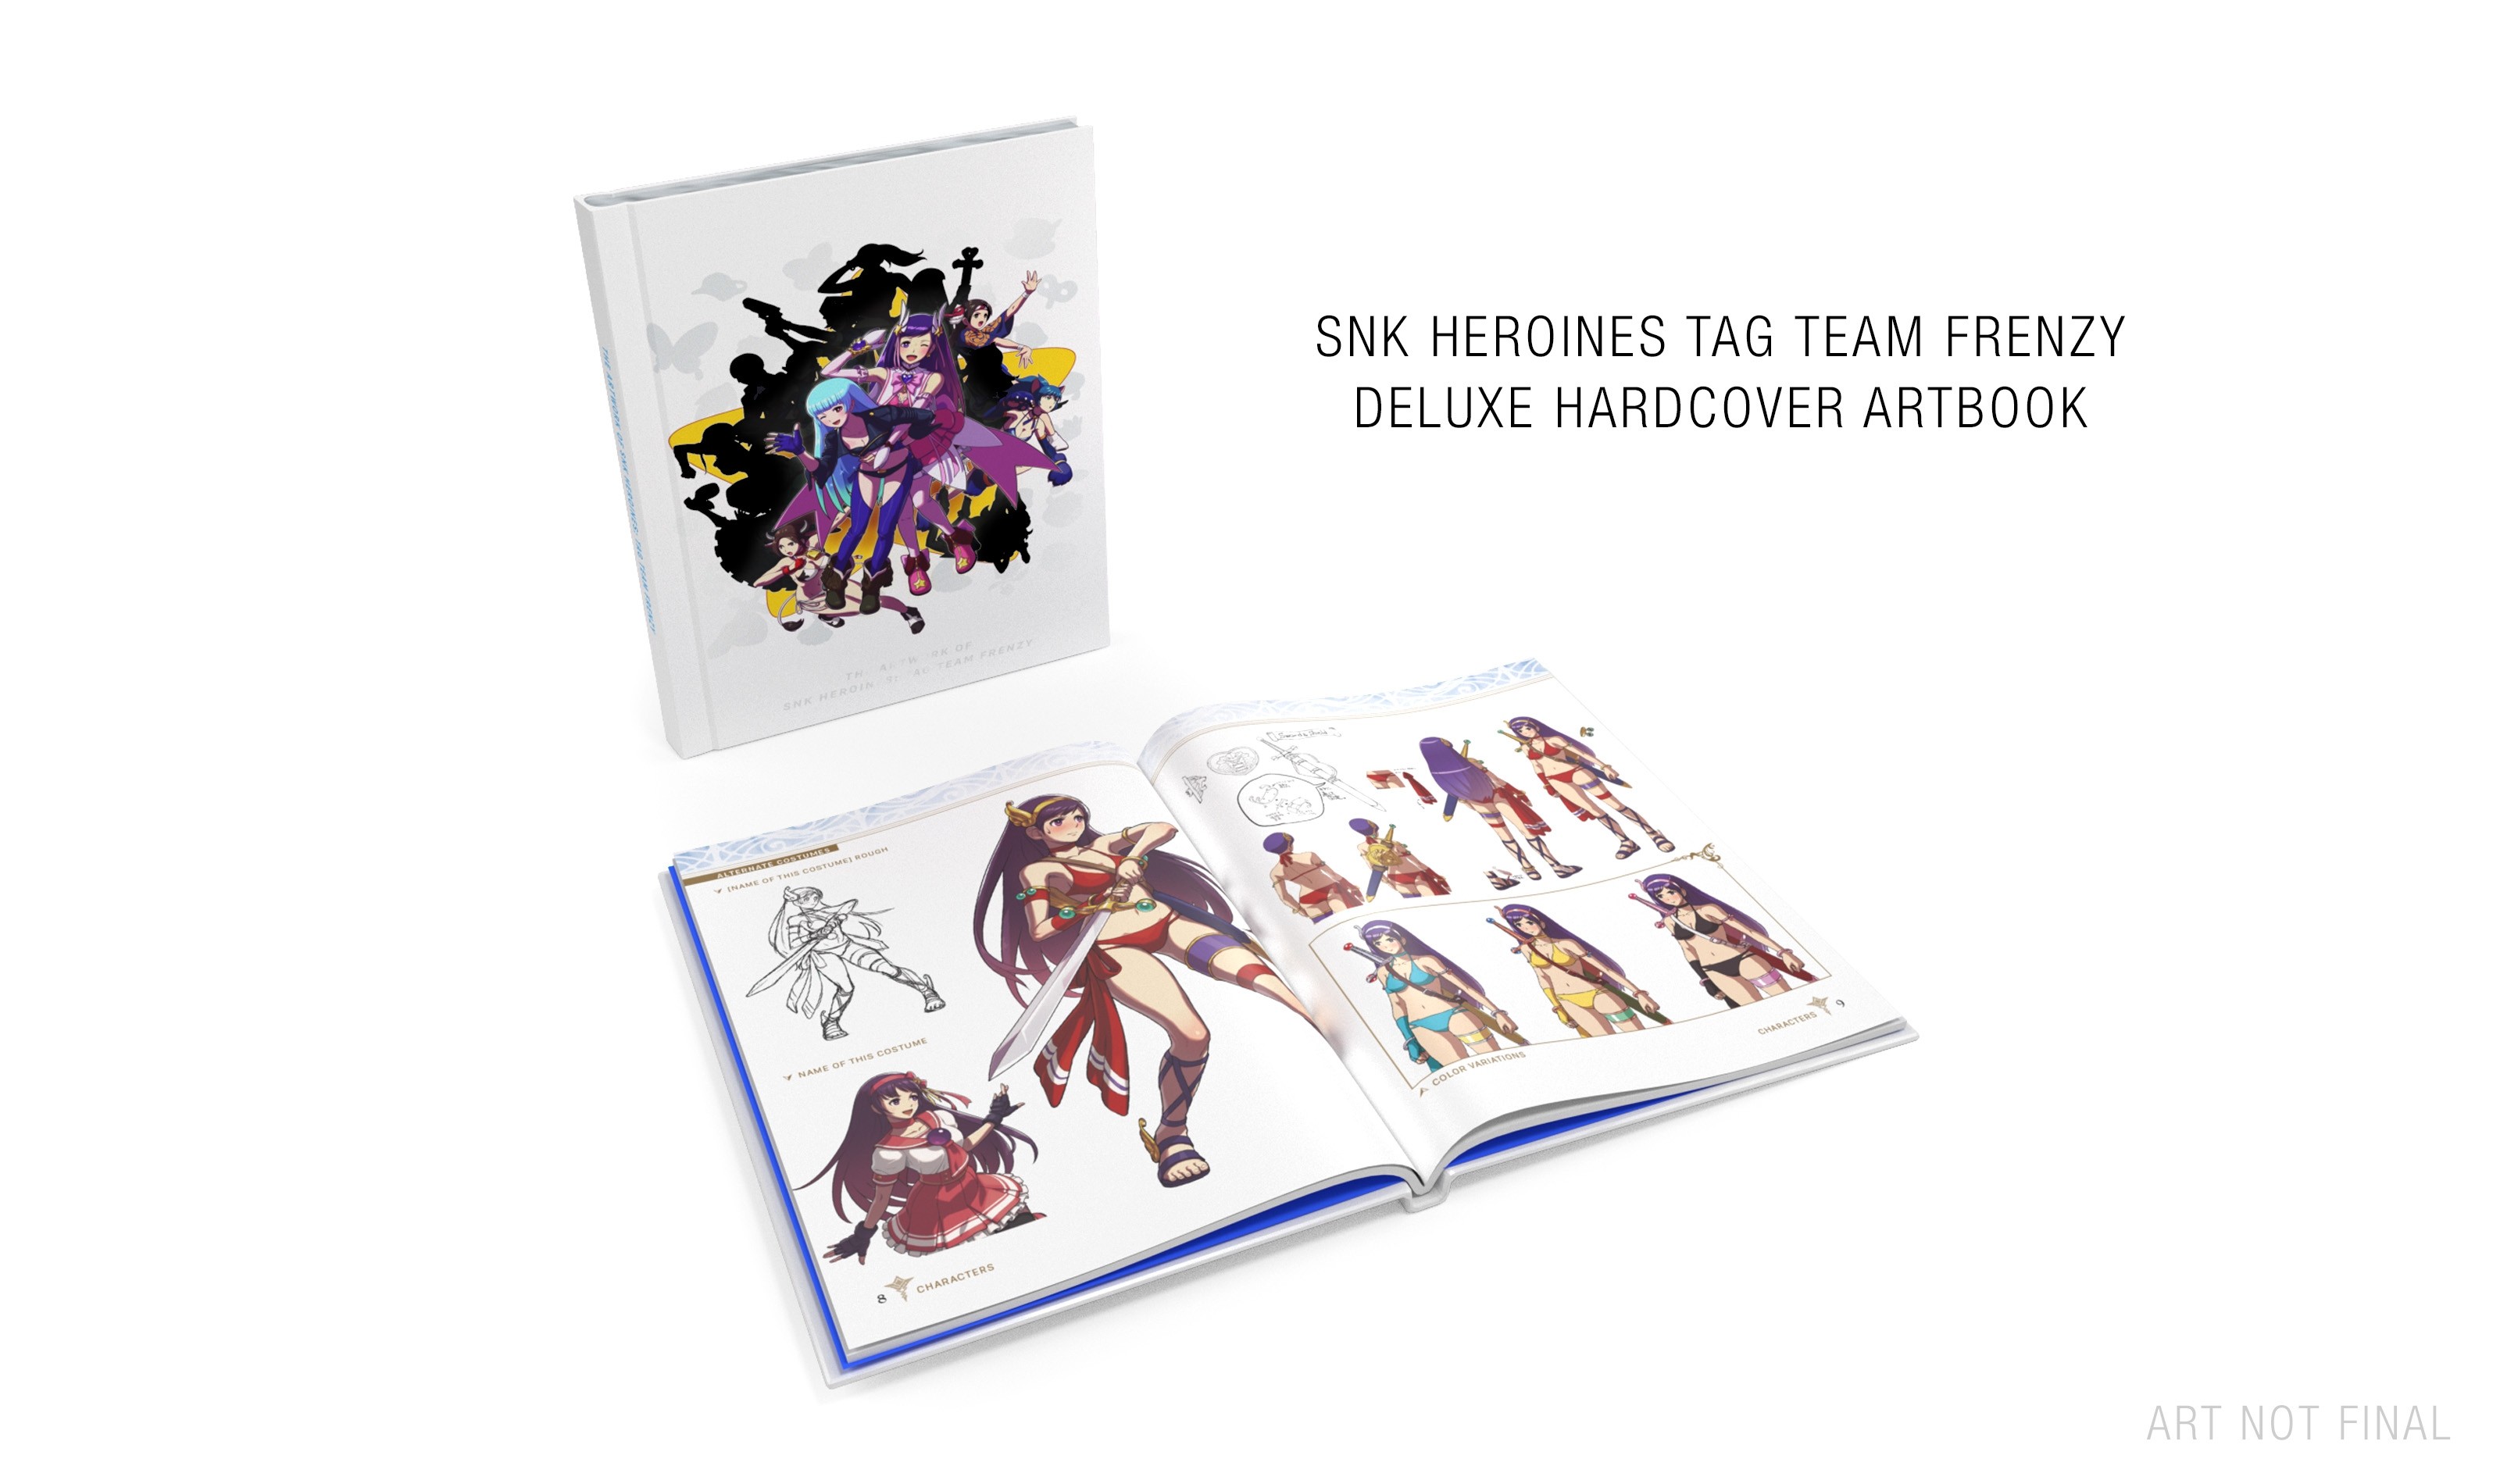 snk-heroines-tag-team-frenzy-deluxe-hardcover-artbook-photo